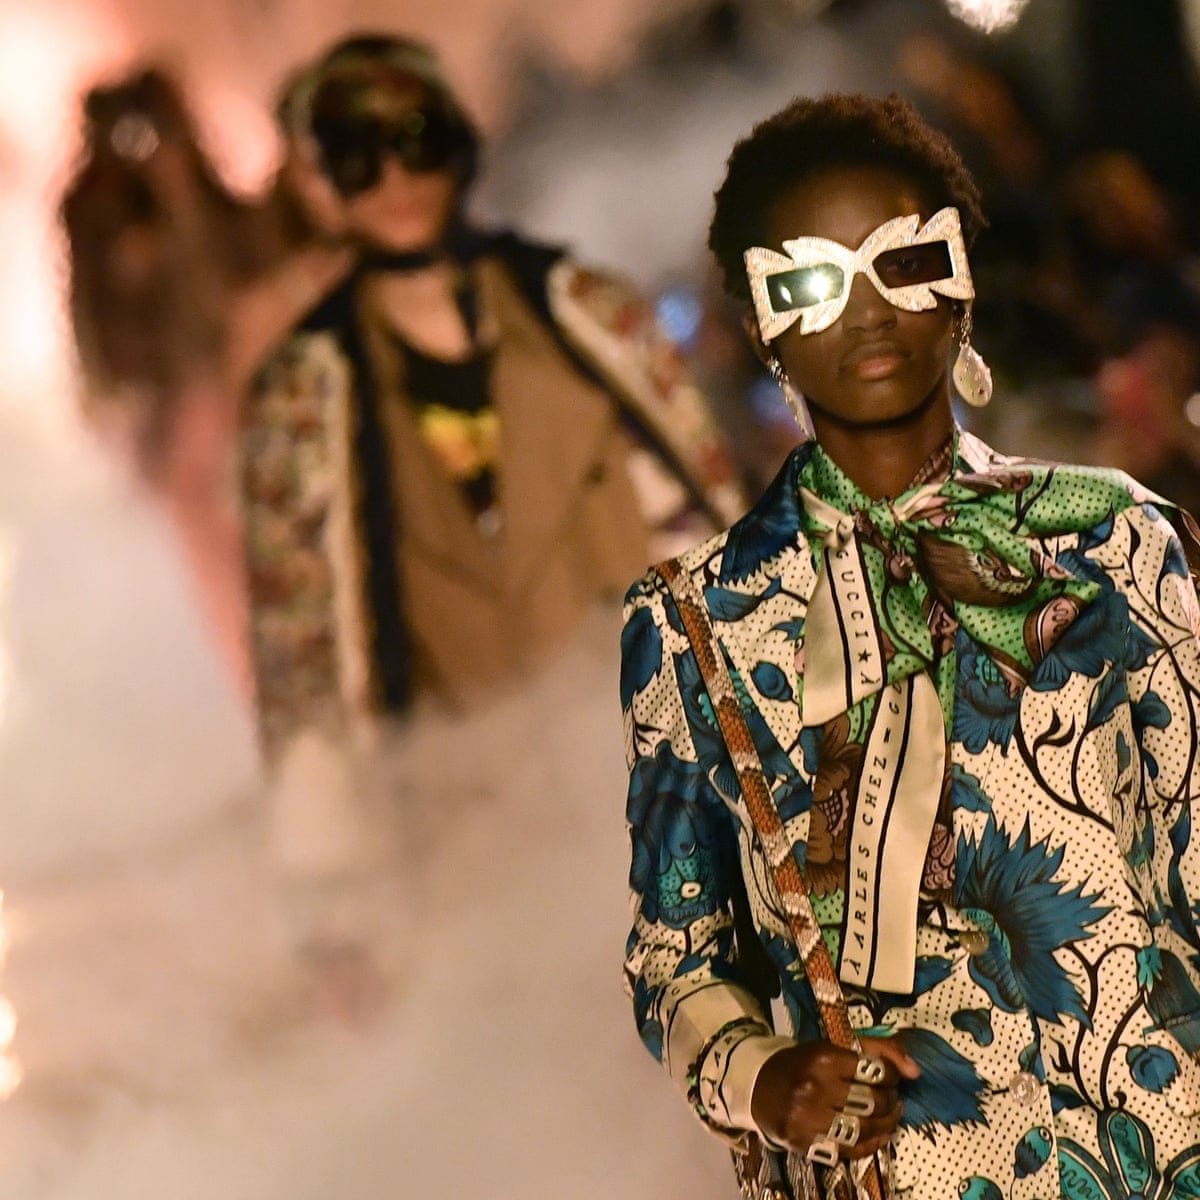 Gucci dances with death in high-glamour horror show | Gucci | The Guardian